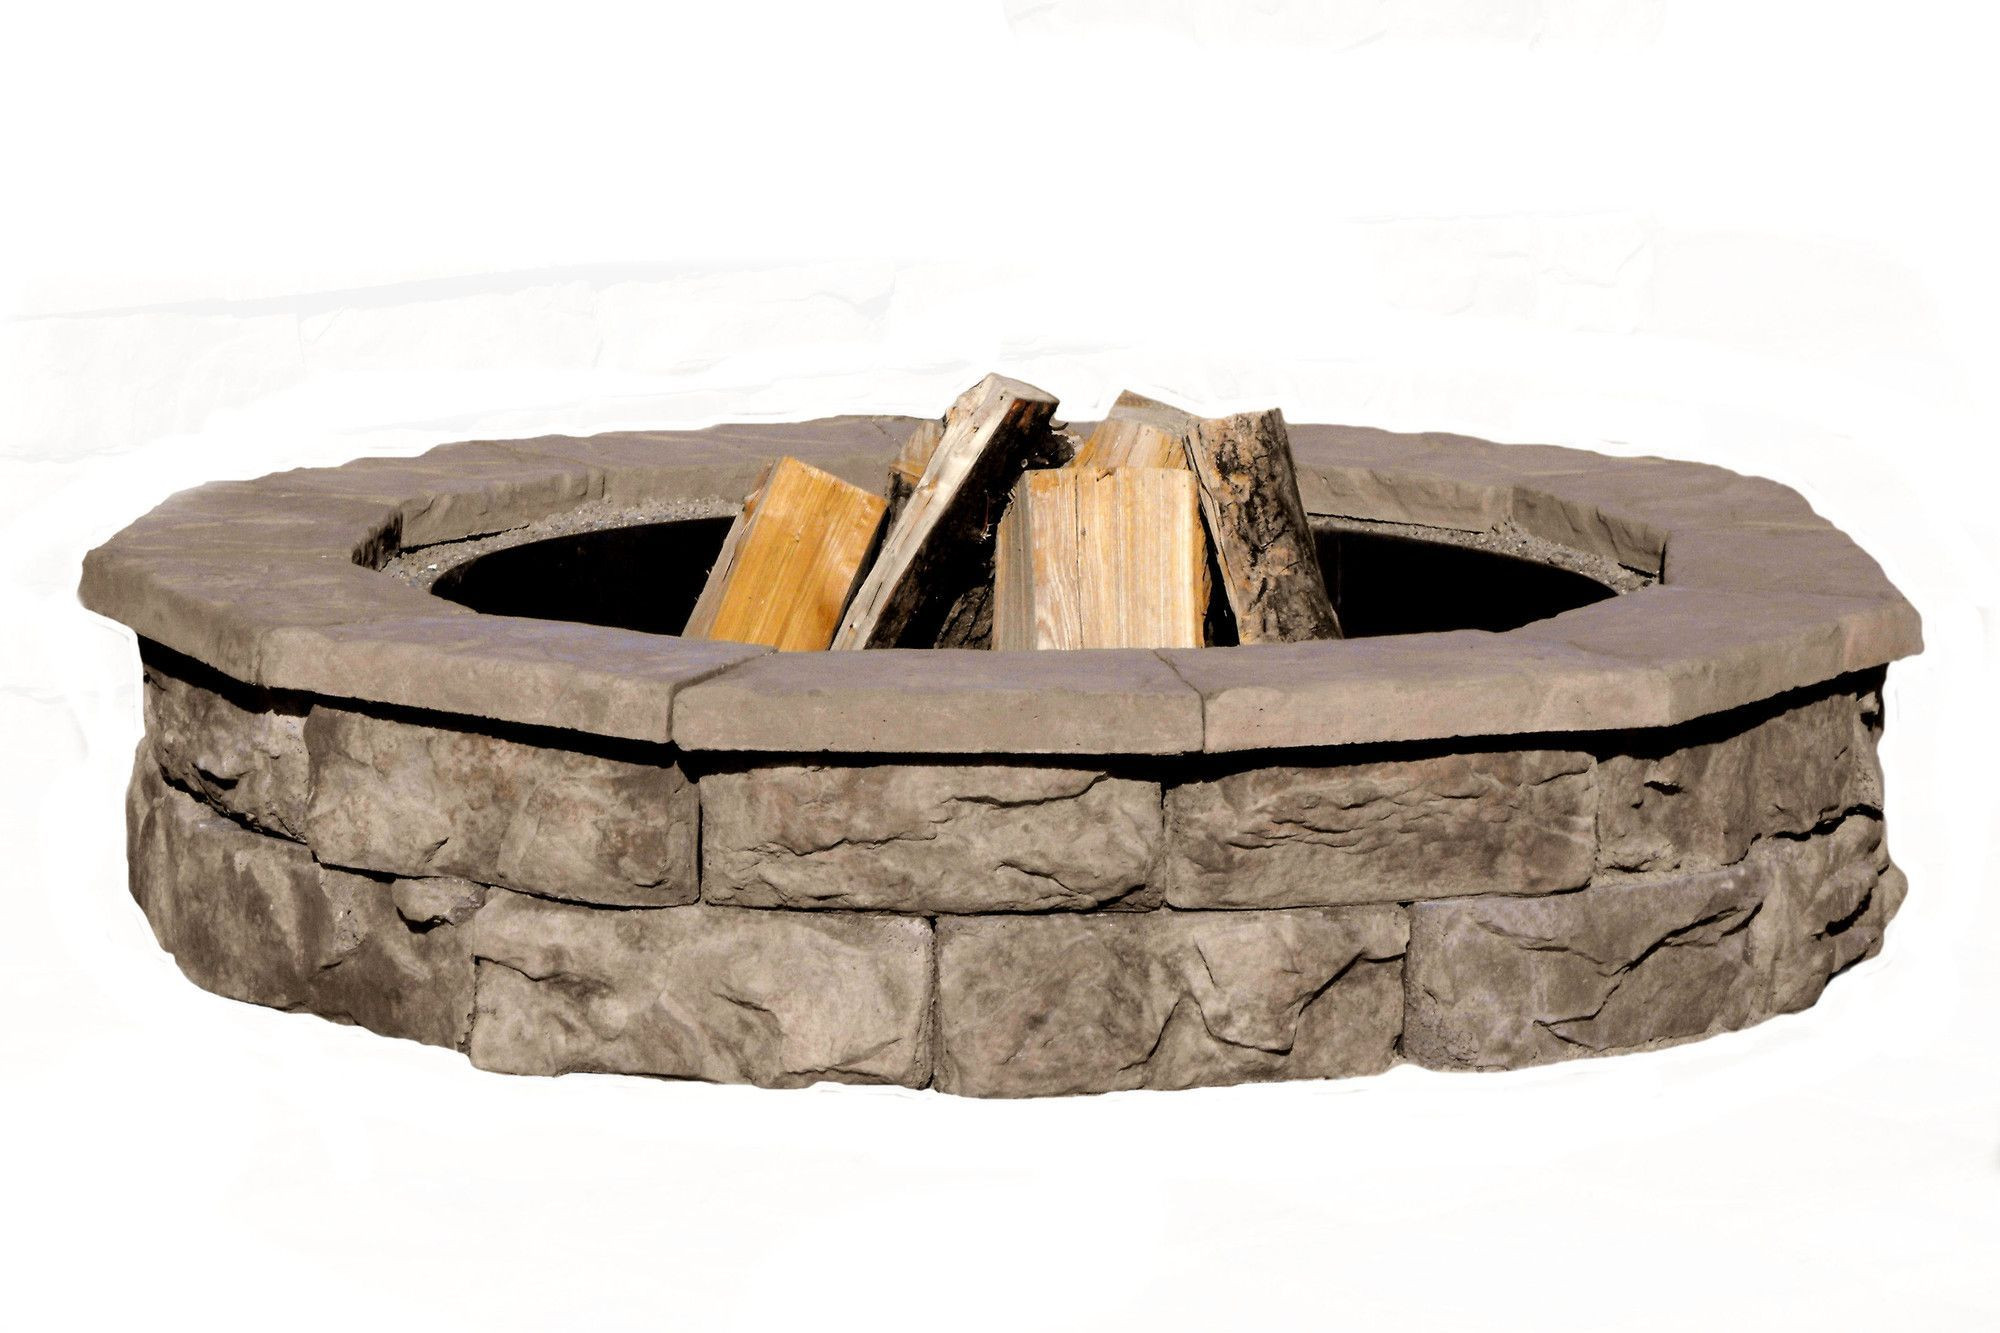 Fossil Stone Fire Pit
 Fossil Stone Wood Burning Fire Pit in 2019